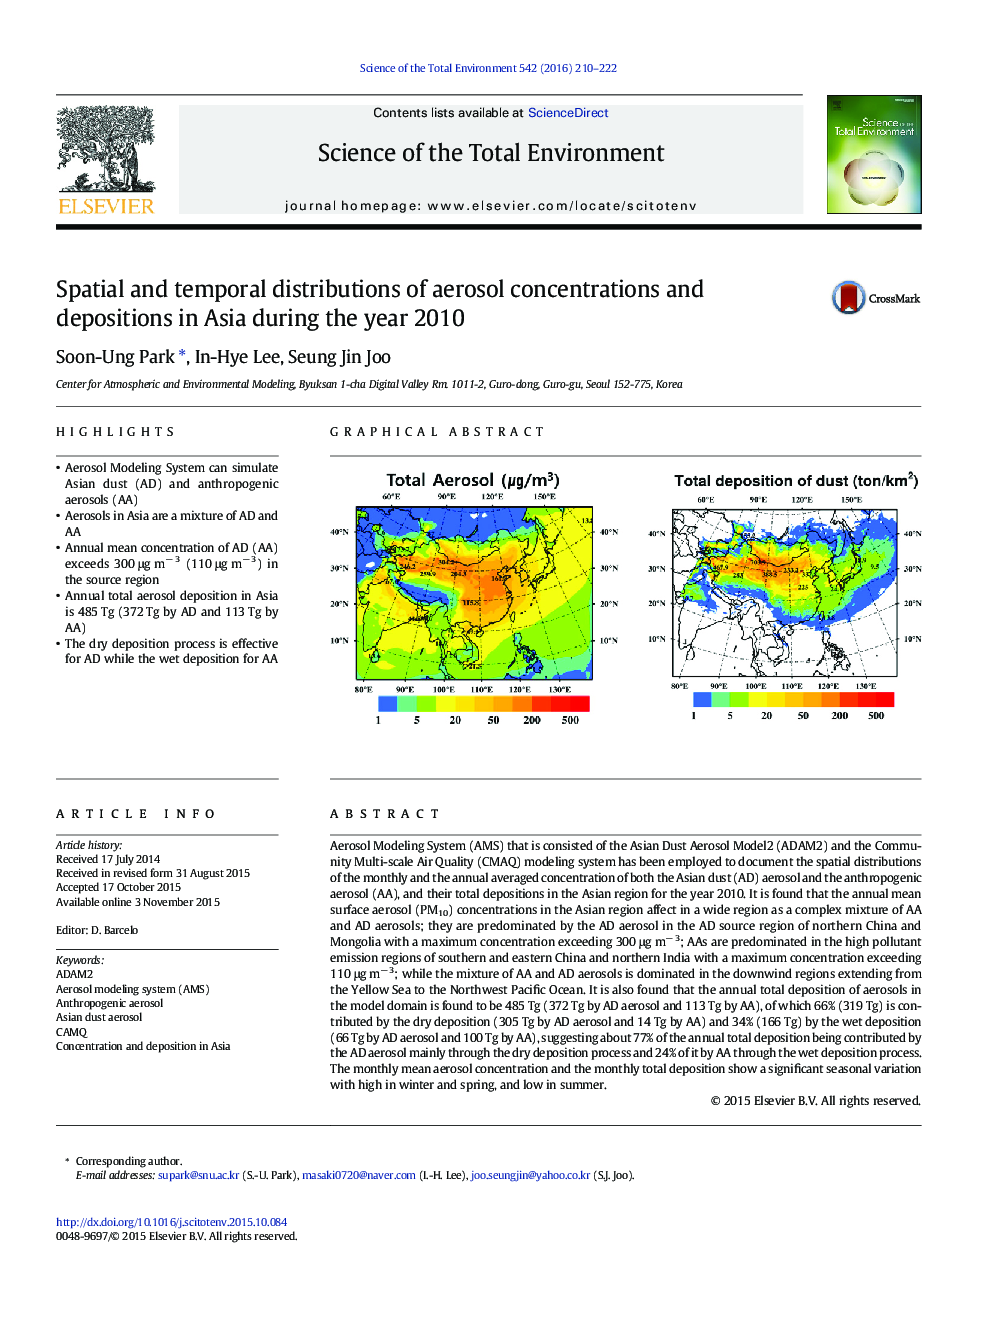 Spatial and temporal distributions of aerosol concentrations and depositions in Asia during the year 2010